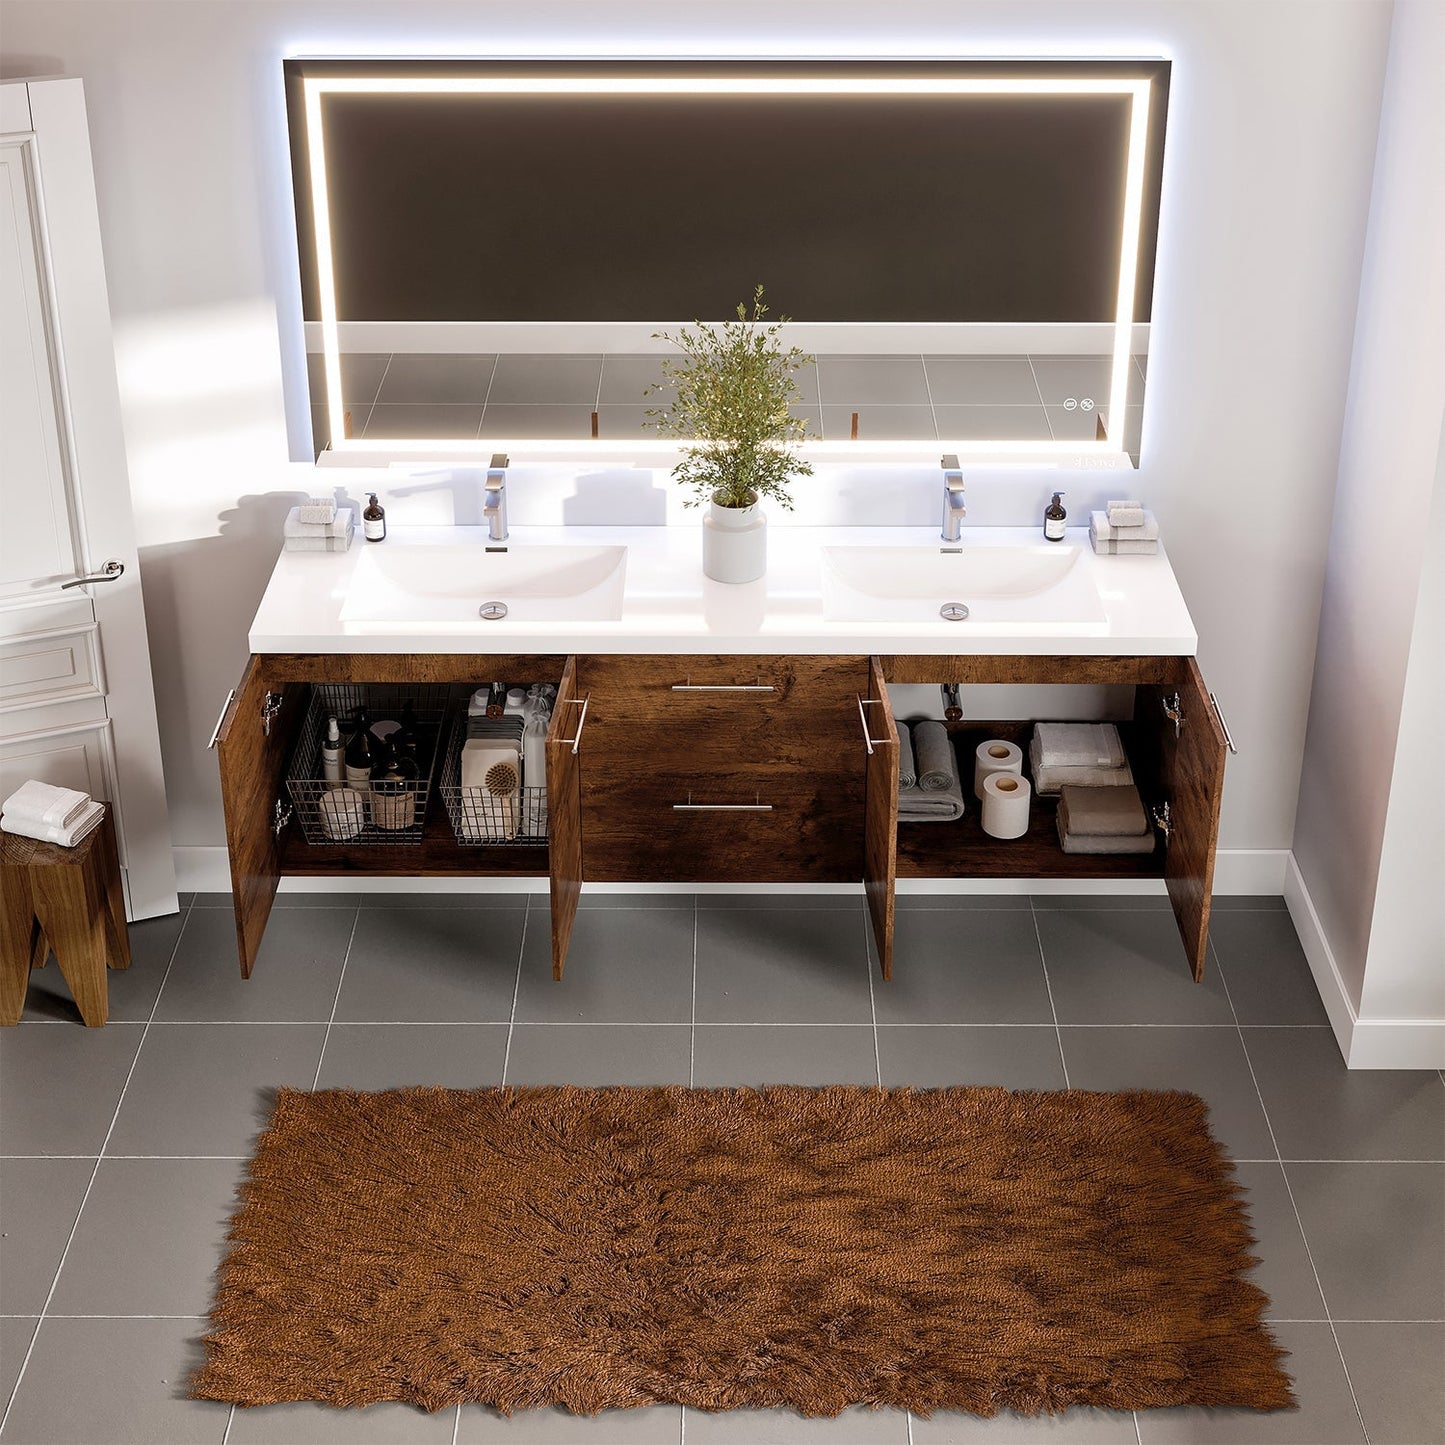 Axis 71"W x 20"D Rosewood Double Sink Bathroom Vanity with Acrylic Countertop and Integrated Sink